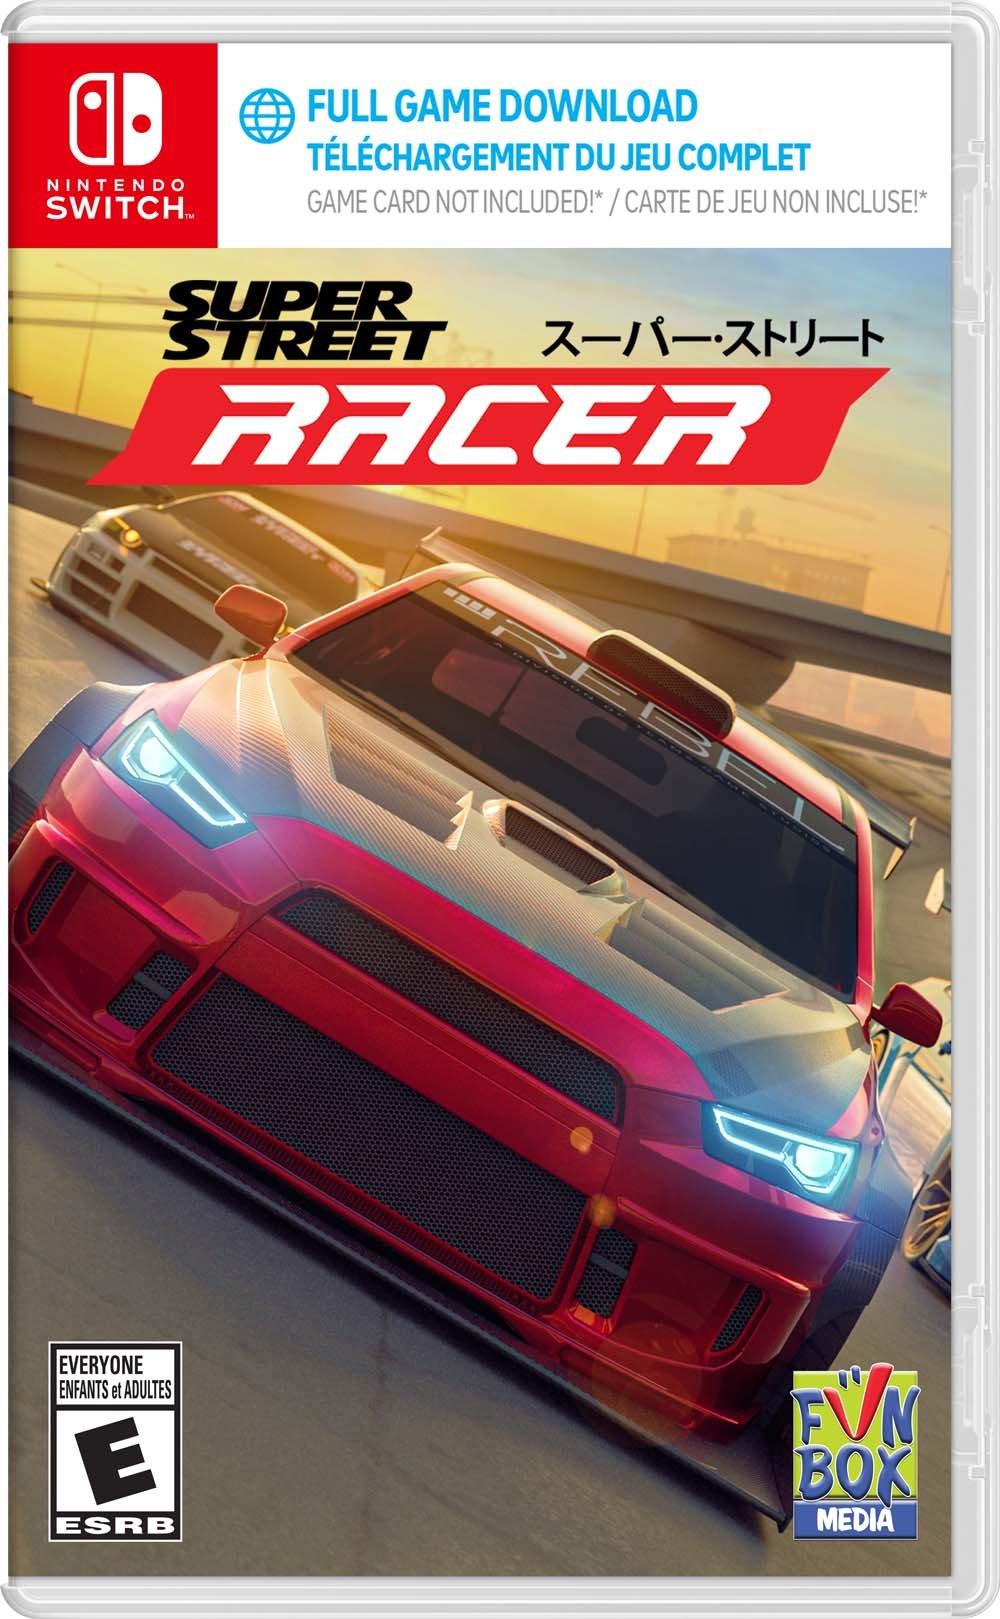  Super Street The Game - PlayStation 4 : Gs2 Games: Video Games